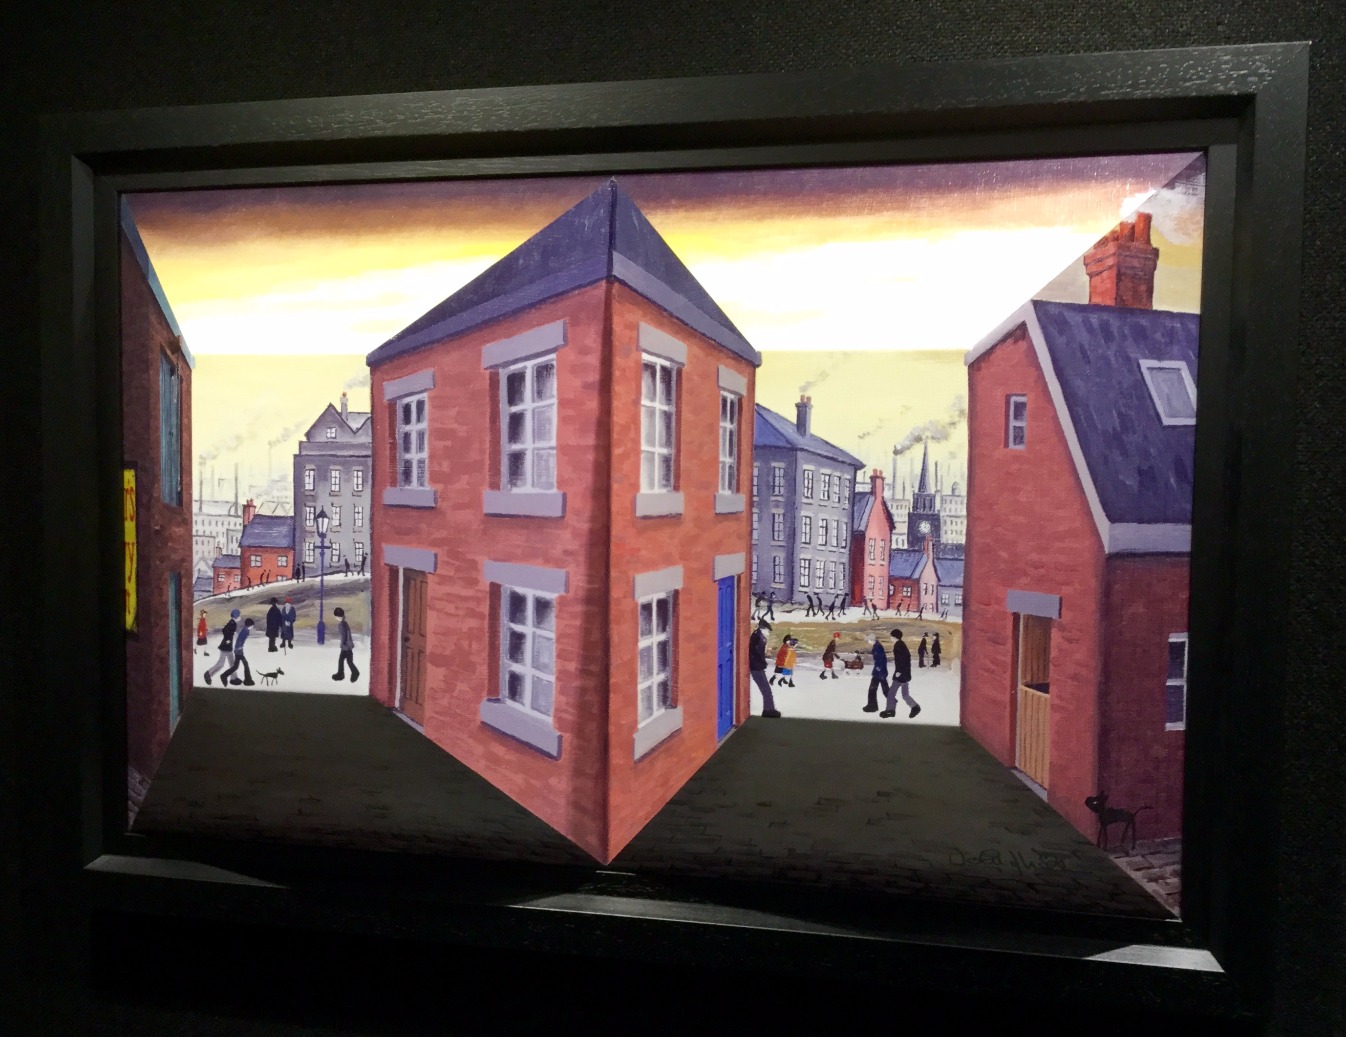 End of the Day by John D Wilson, Local | 3D | Lowry | Northern | Nostalgic